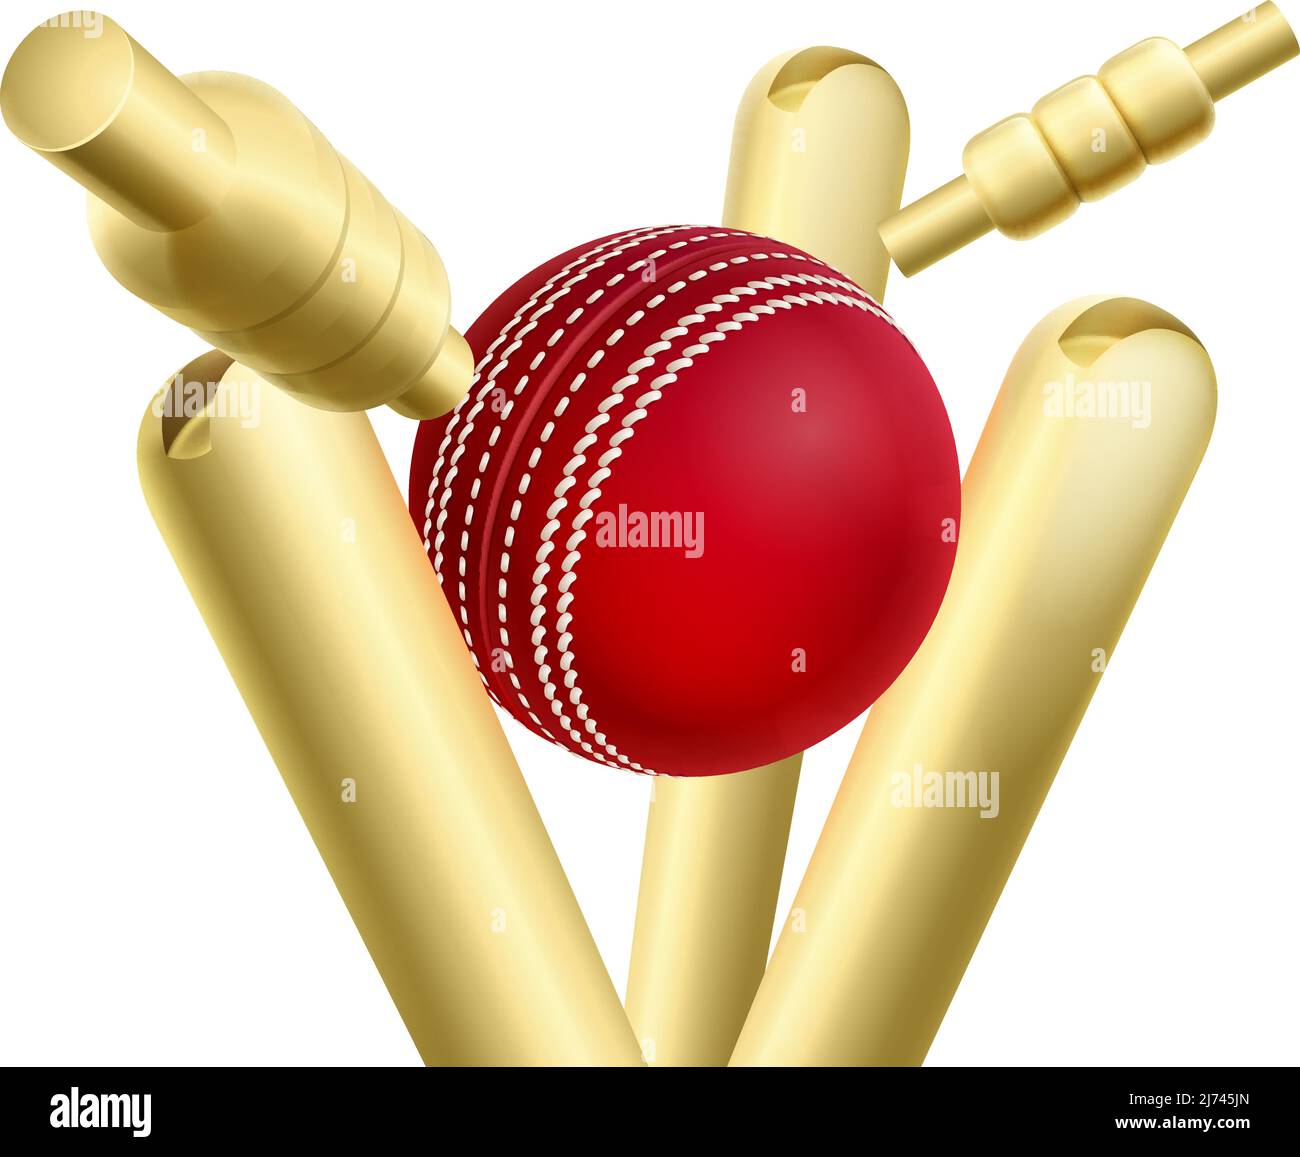 Cricket Ball Knocking Over Wickets Or Stumps Stock Vector